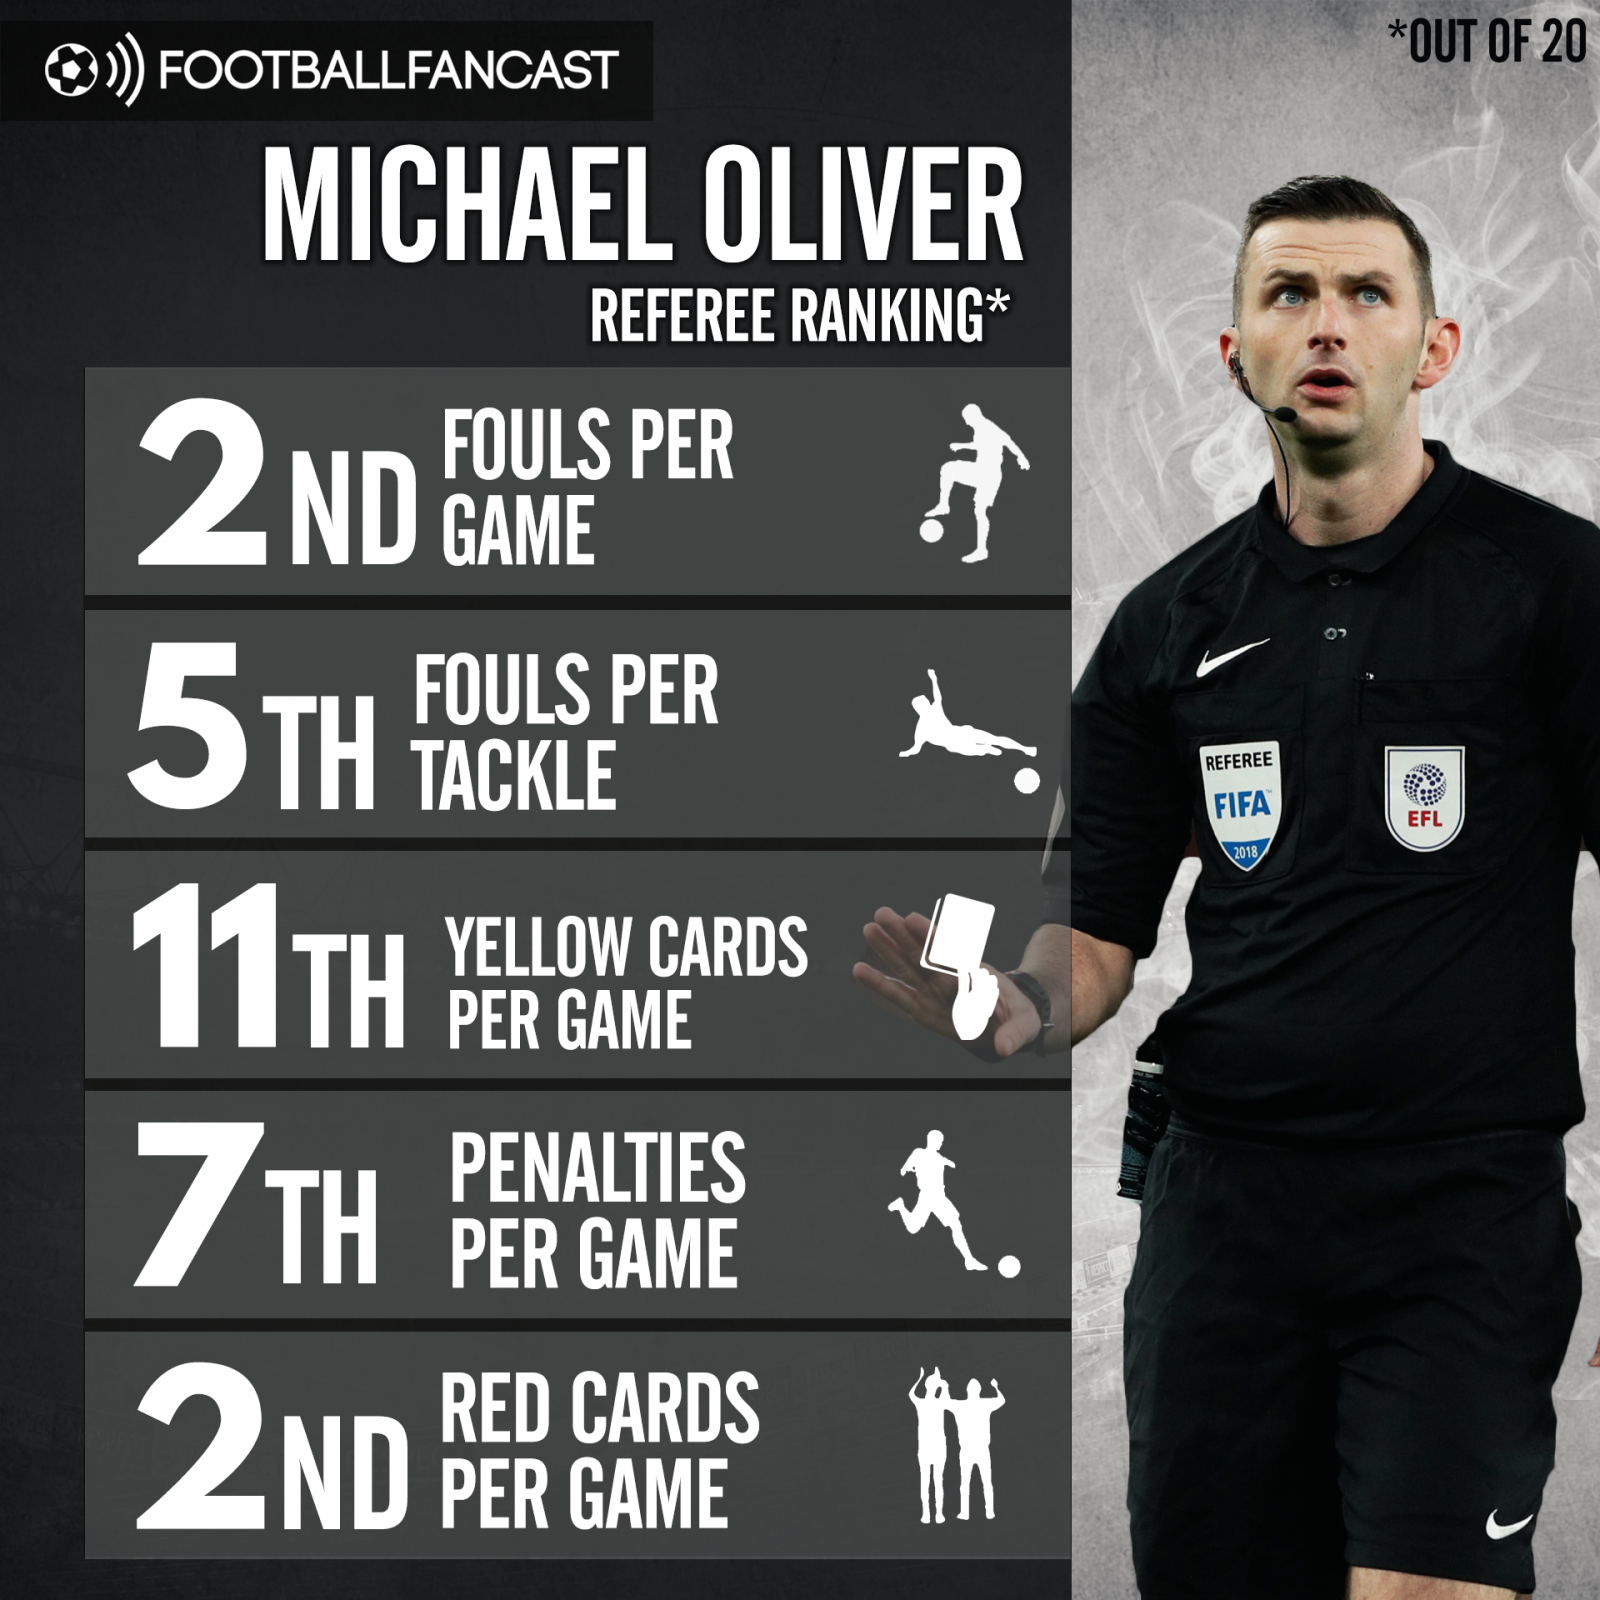 Michael Oliver's stats from the Premier League this season